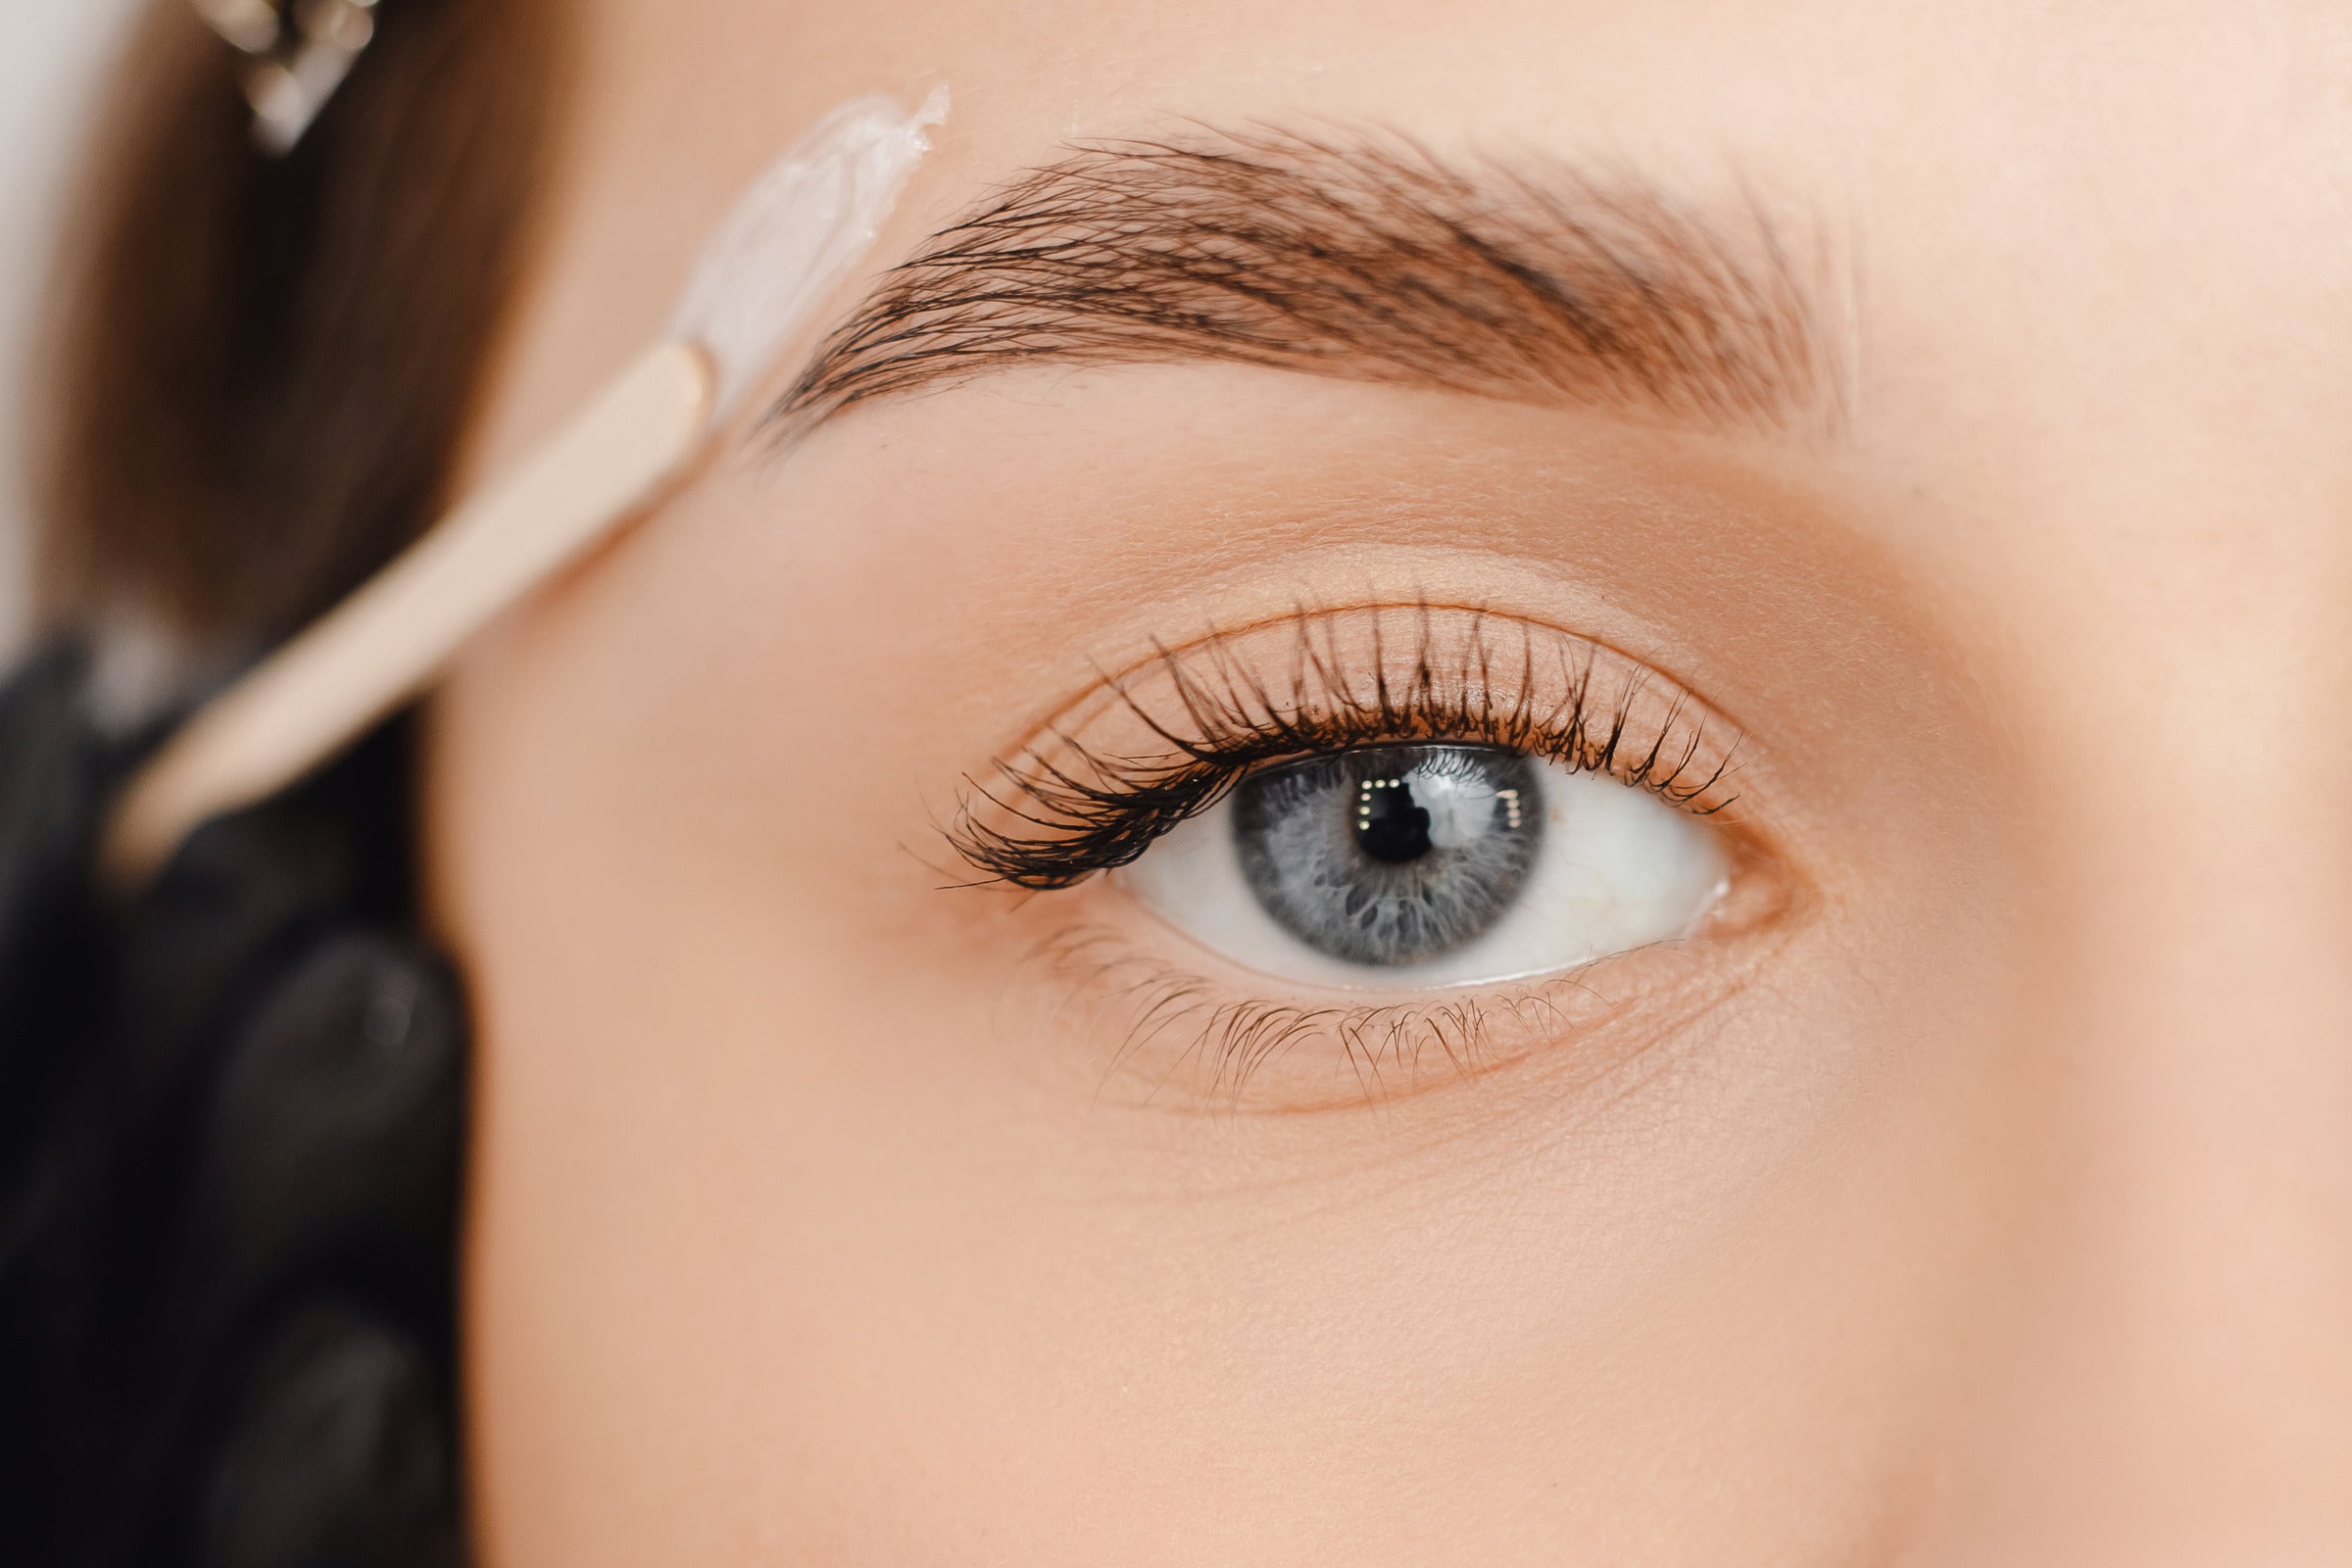 The 6 Things To Consider Before Waxing Your Eyebrows